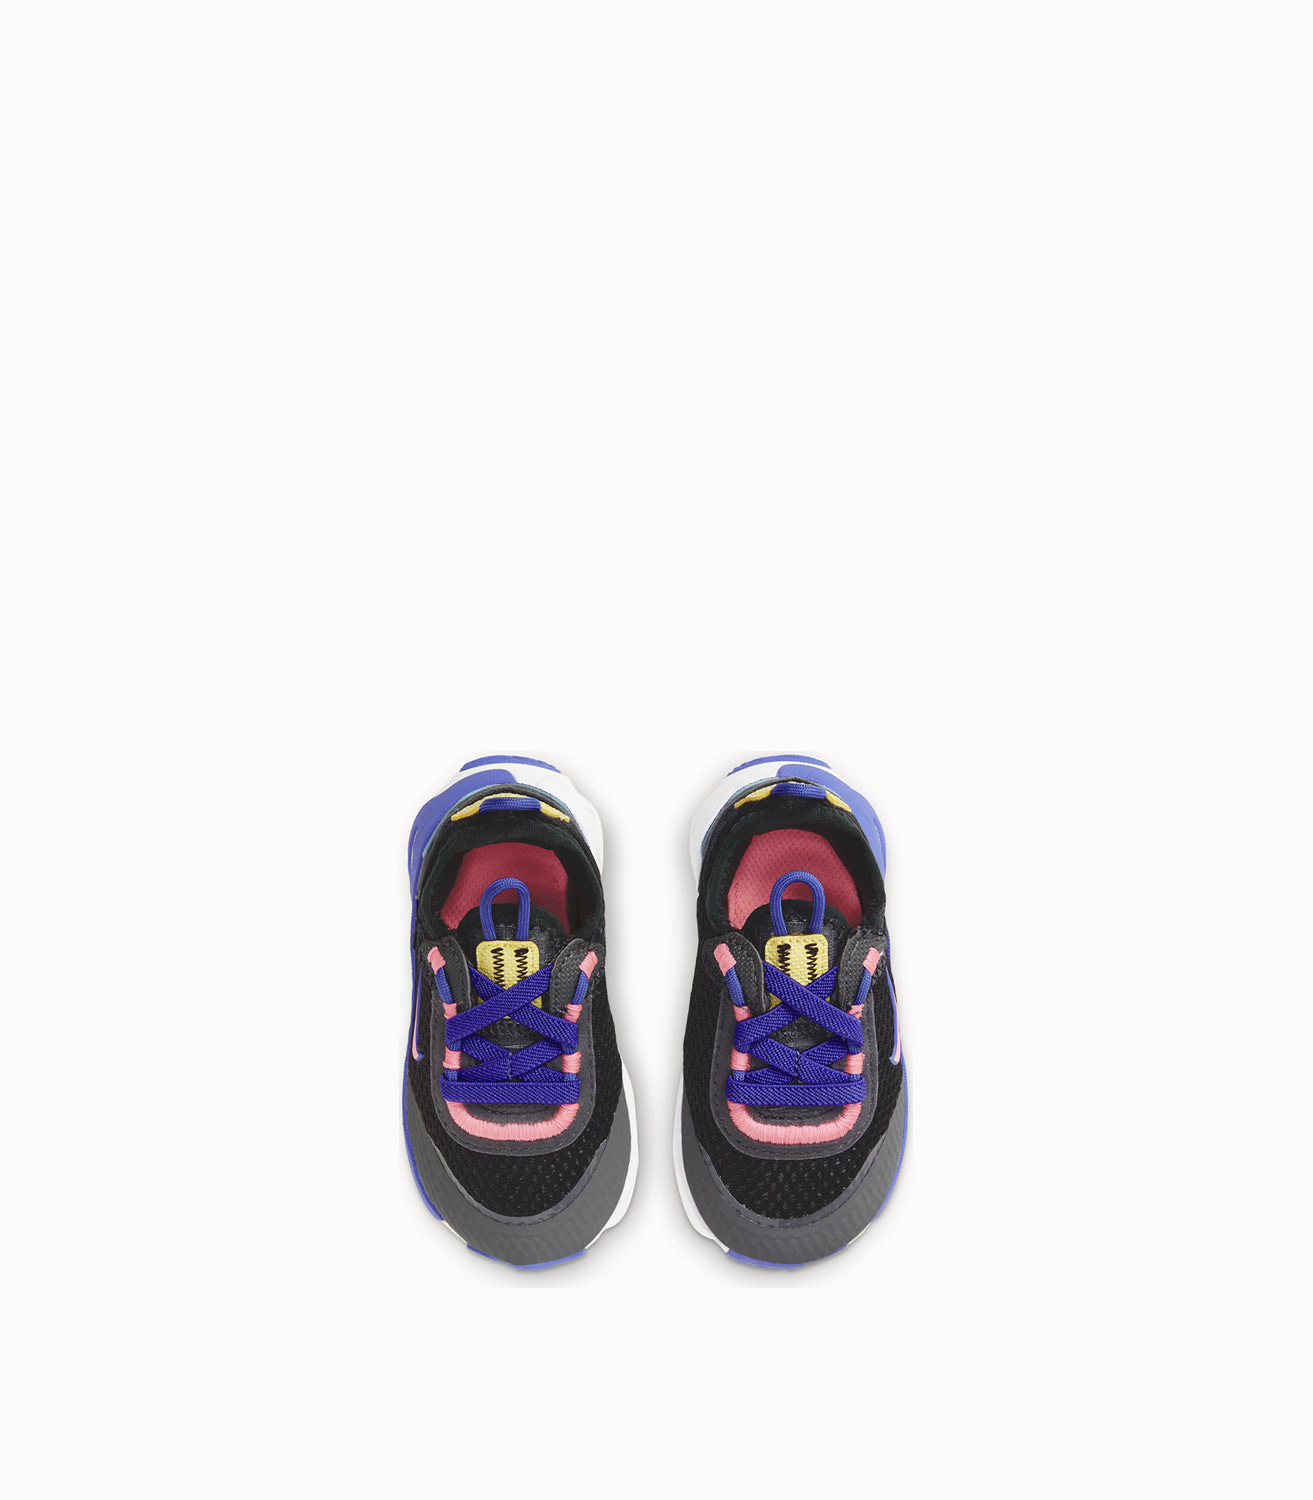 Nike Rt Live Td Sneakers Color Black Playground